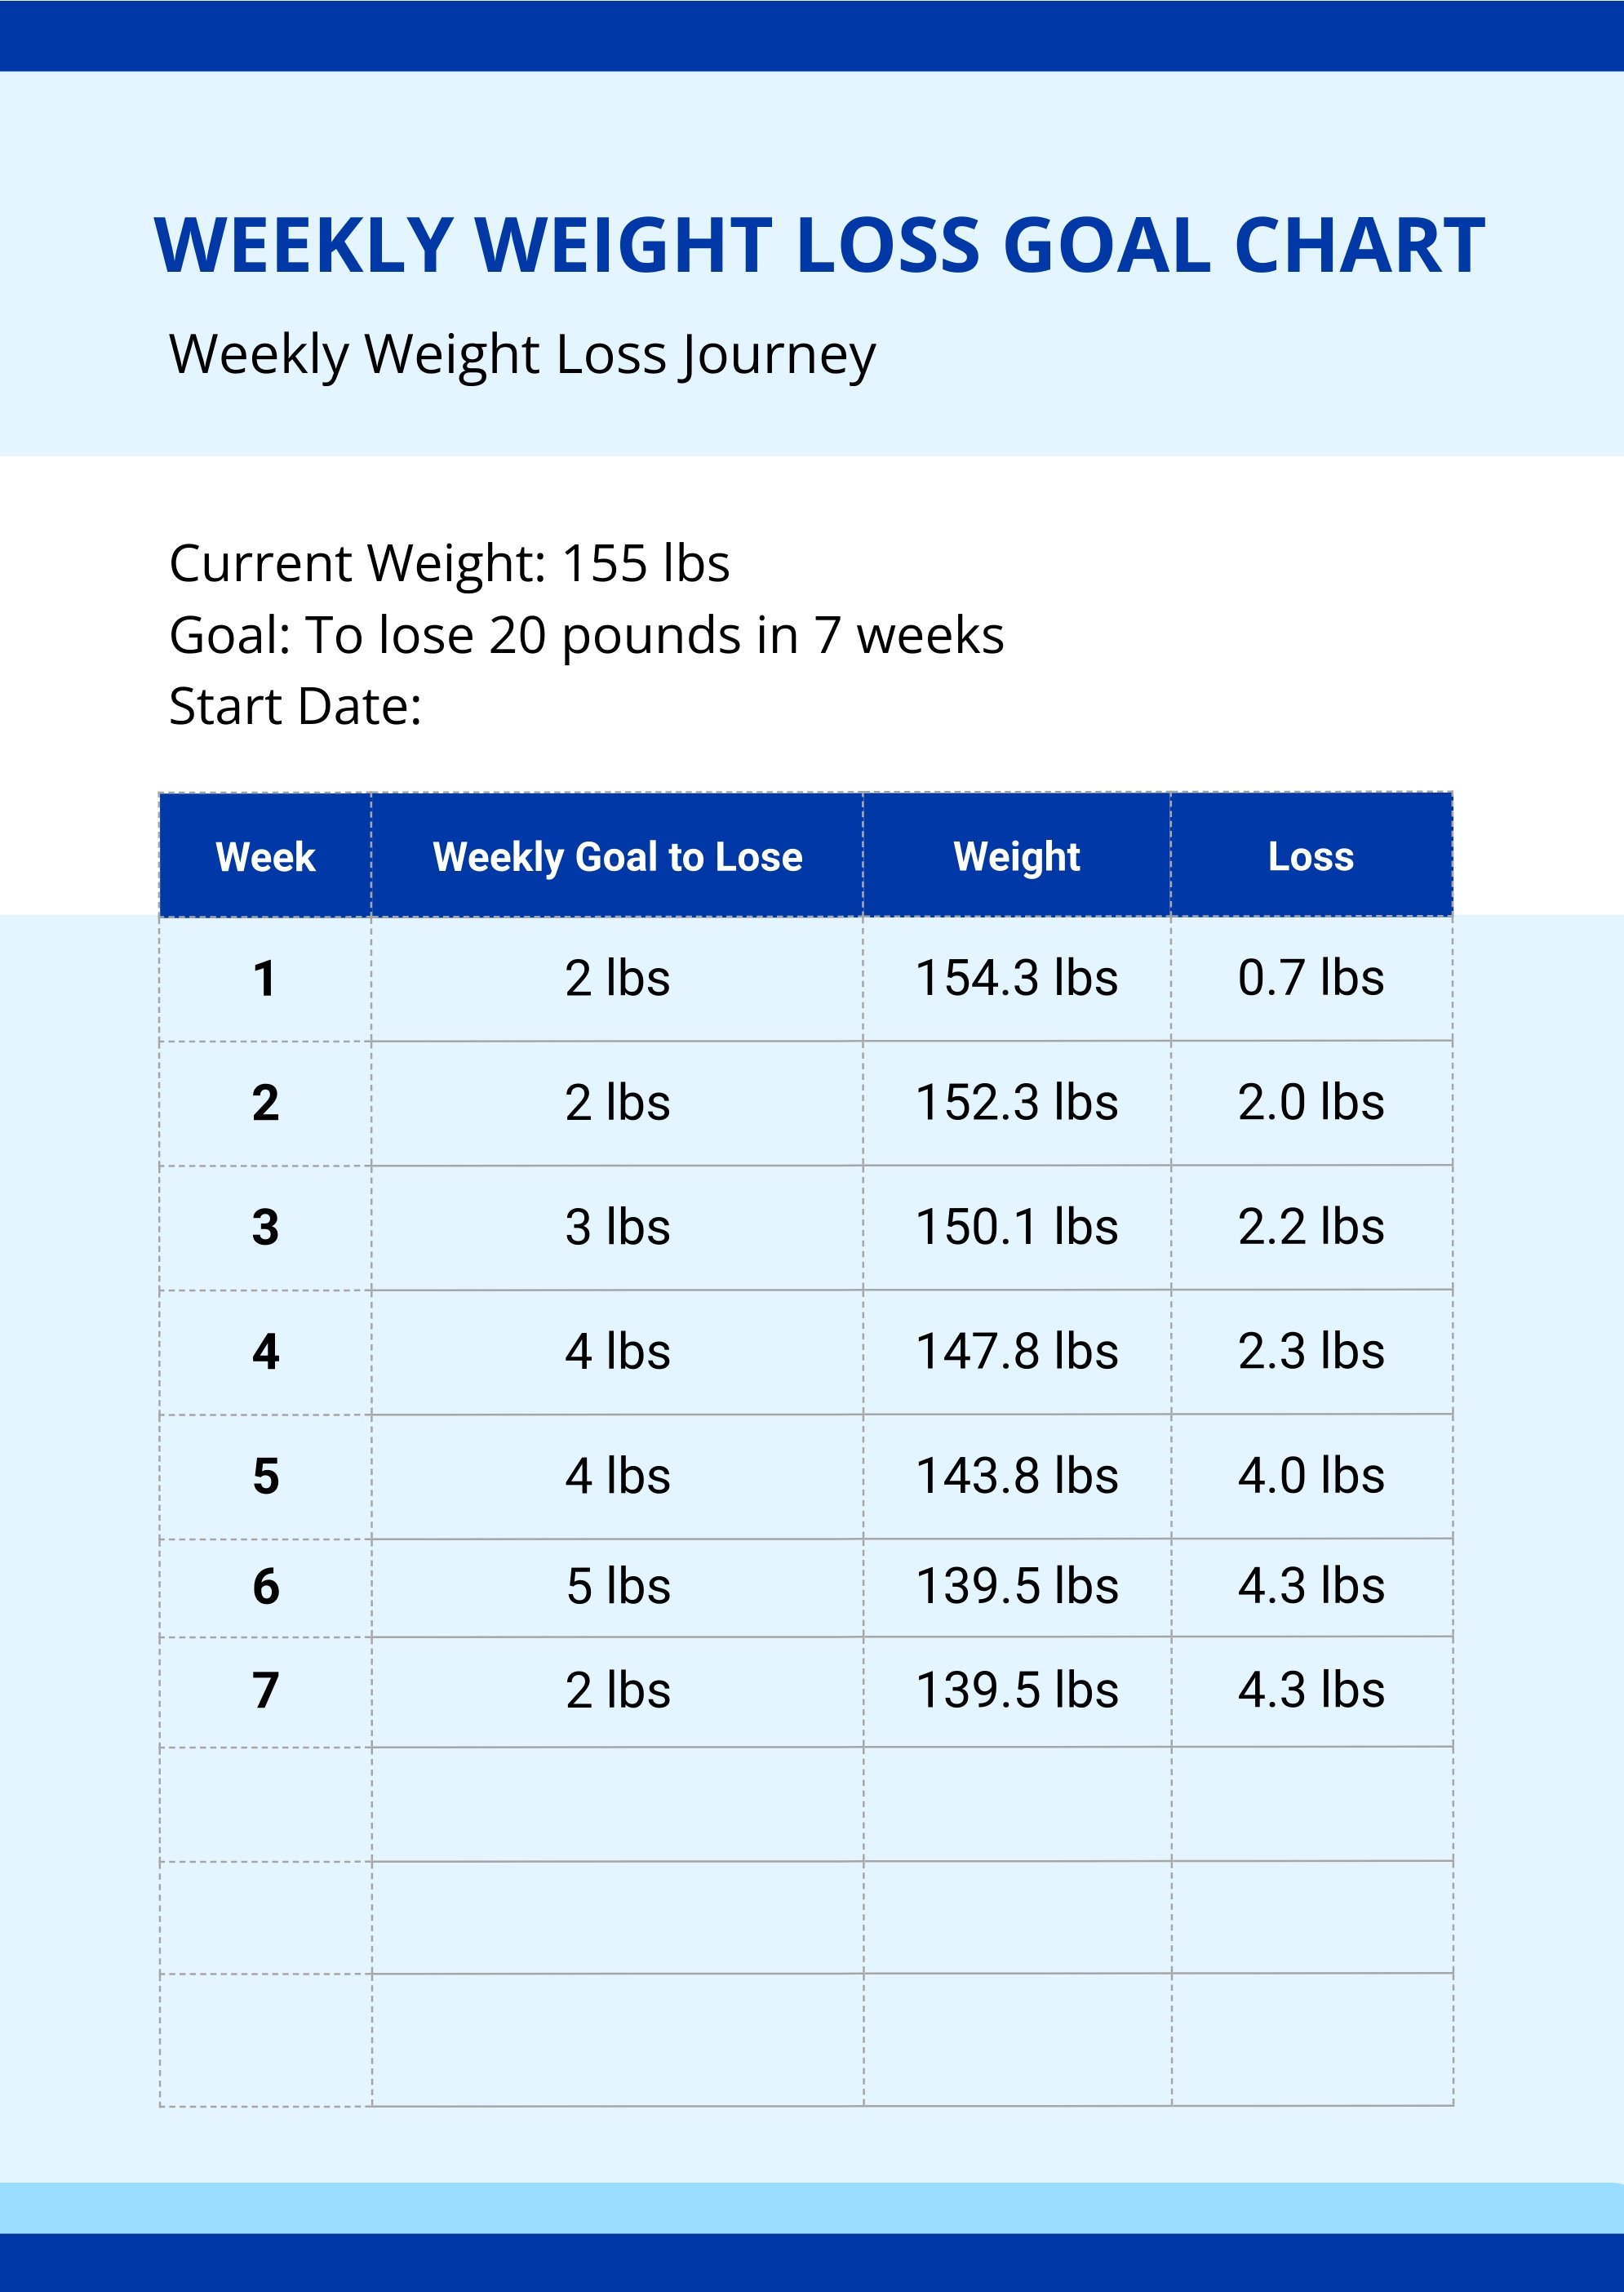 Free Basic Weekly Weight Loss Chart Download in PDF, Illustrator